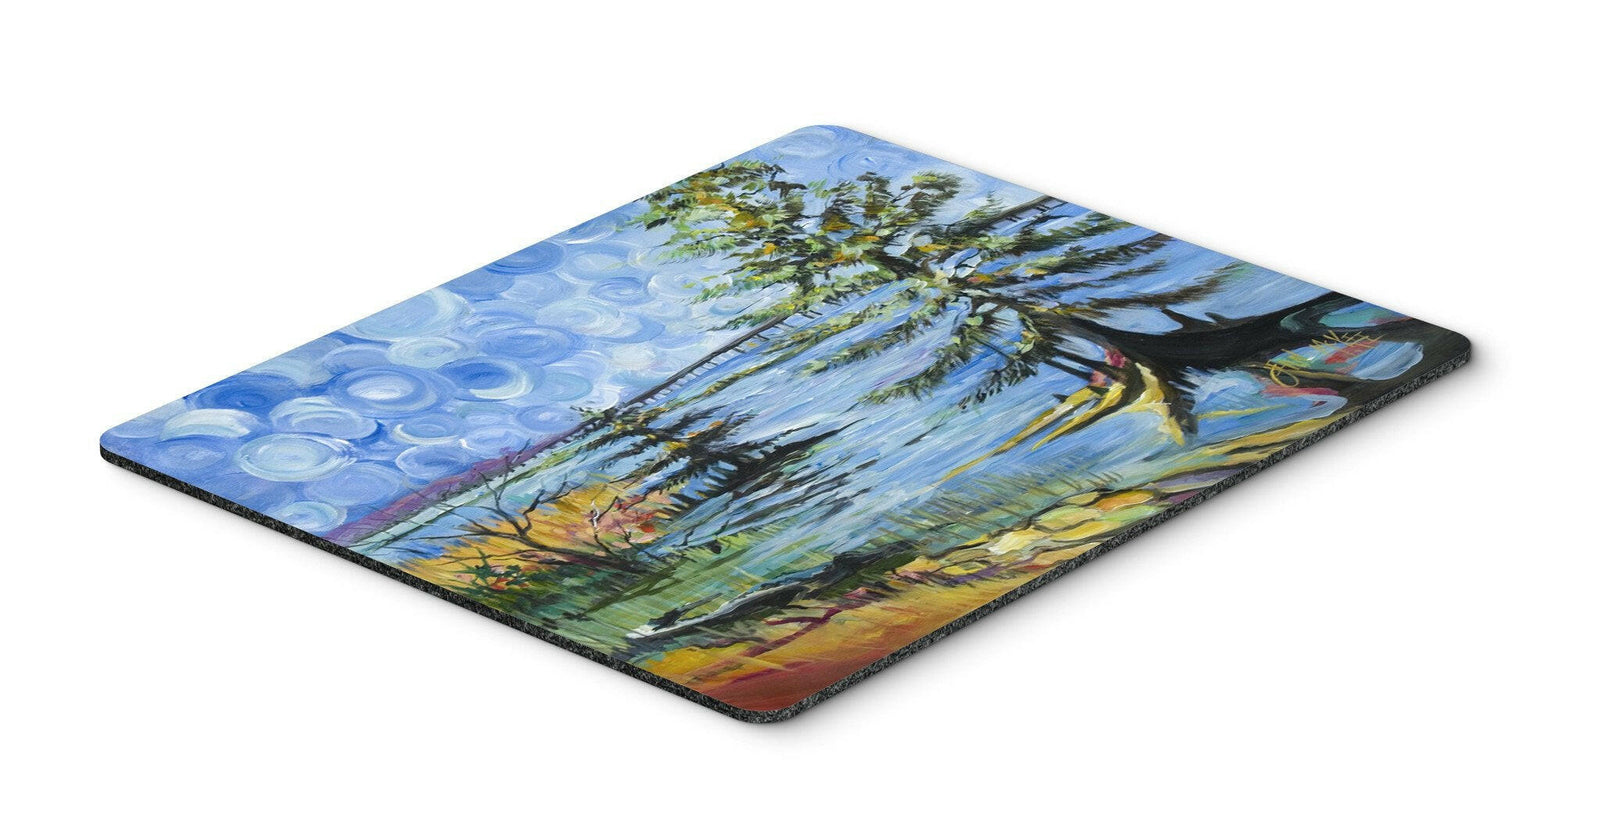 Life on the Causeway Mouse Pad, Hot Pad or Trivet JMK1126MP by Caroline's Treasures